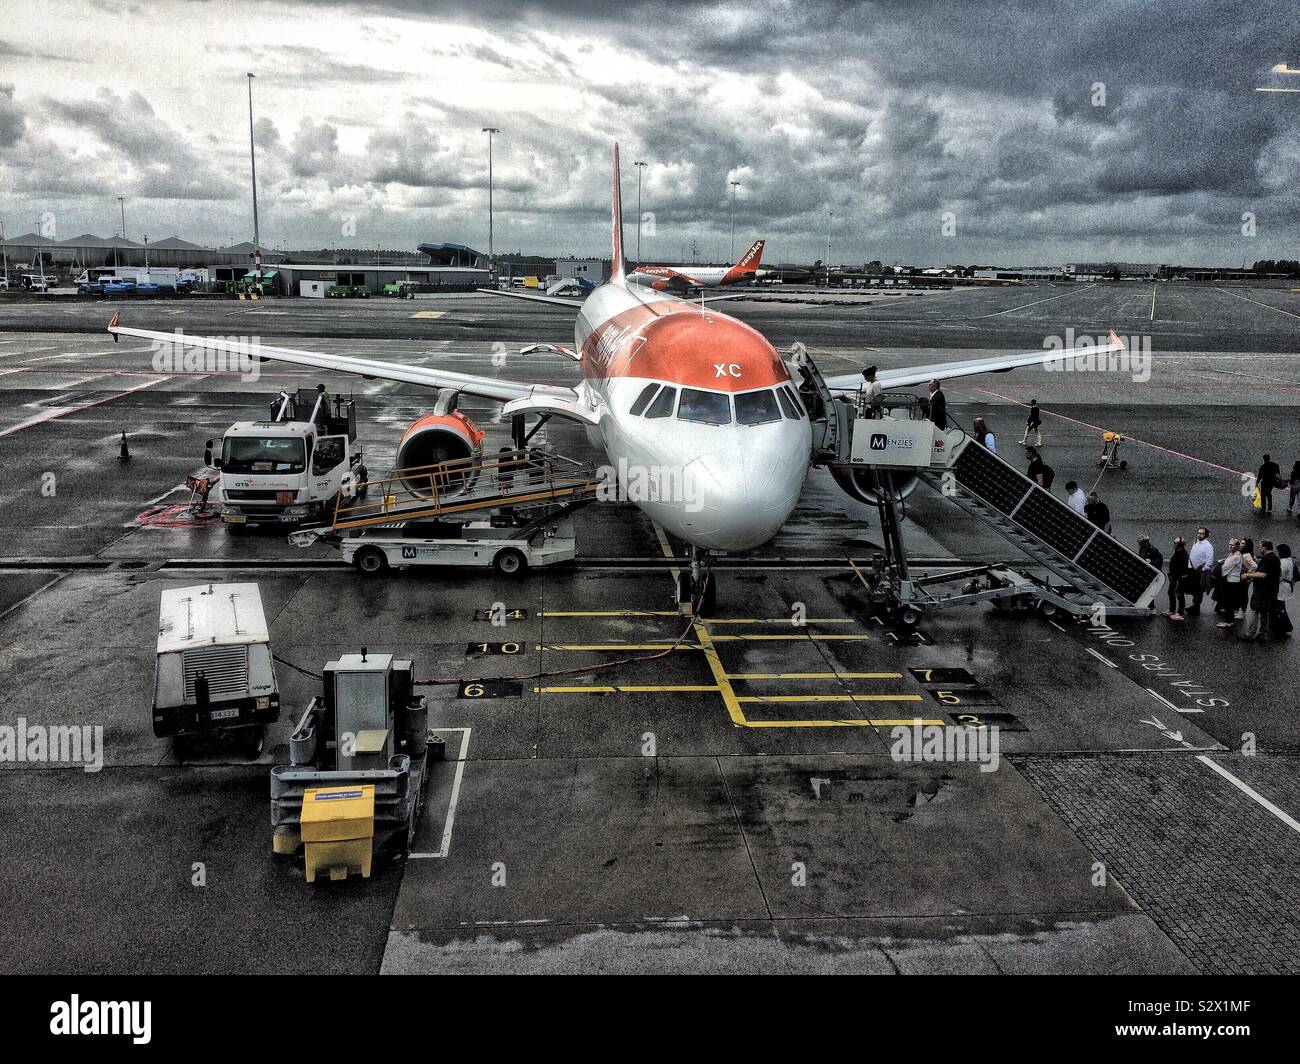 EasyJet Airbus boarding at Schiphol Airport Stock Photo